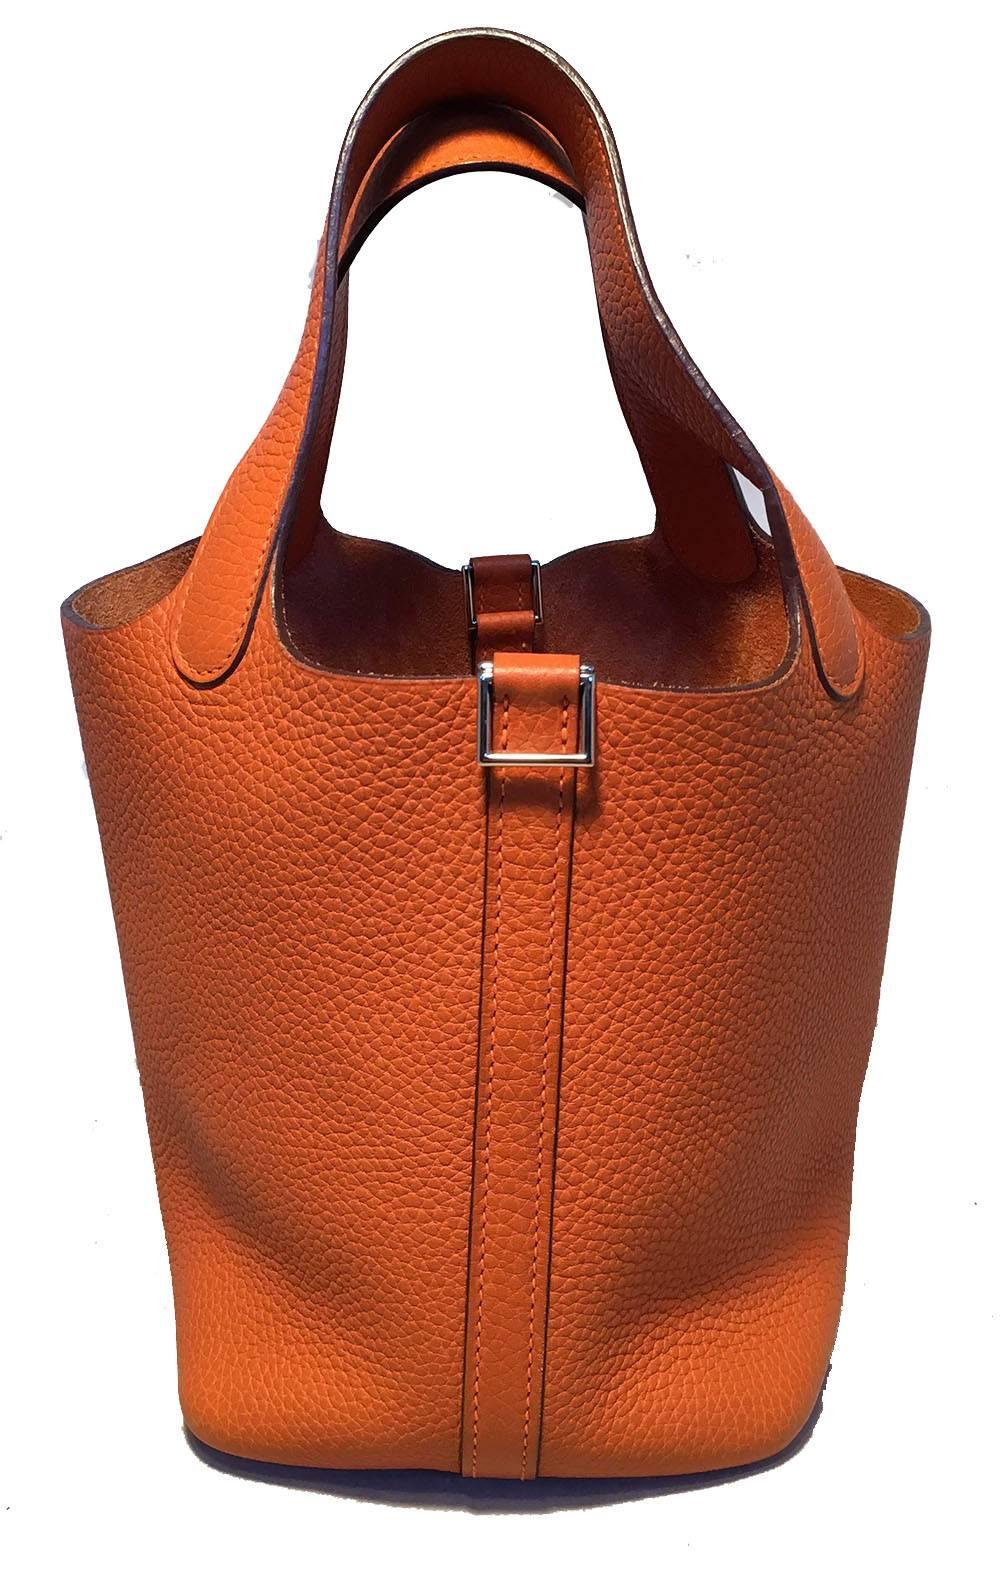 Fabulous Hermes Orange Clemence Leather Picotin PM Handbag in excellent condition.  Orange clemence leather exterior trimmed with silver palladium hardware. Perfect small size for any occasion and fits all your essentials in classic Hermes style.